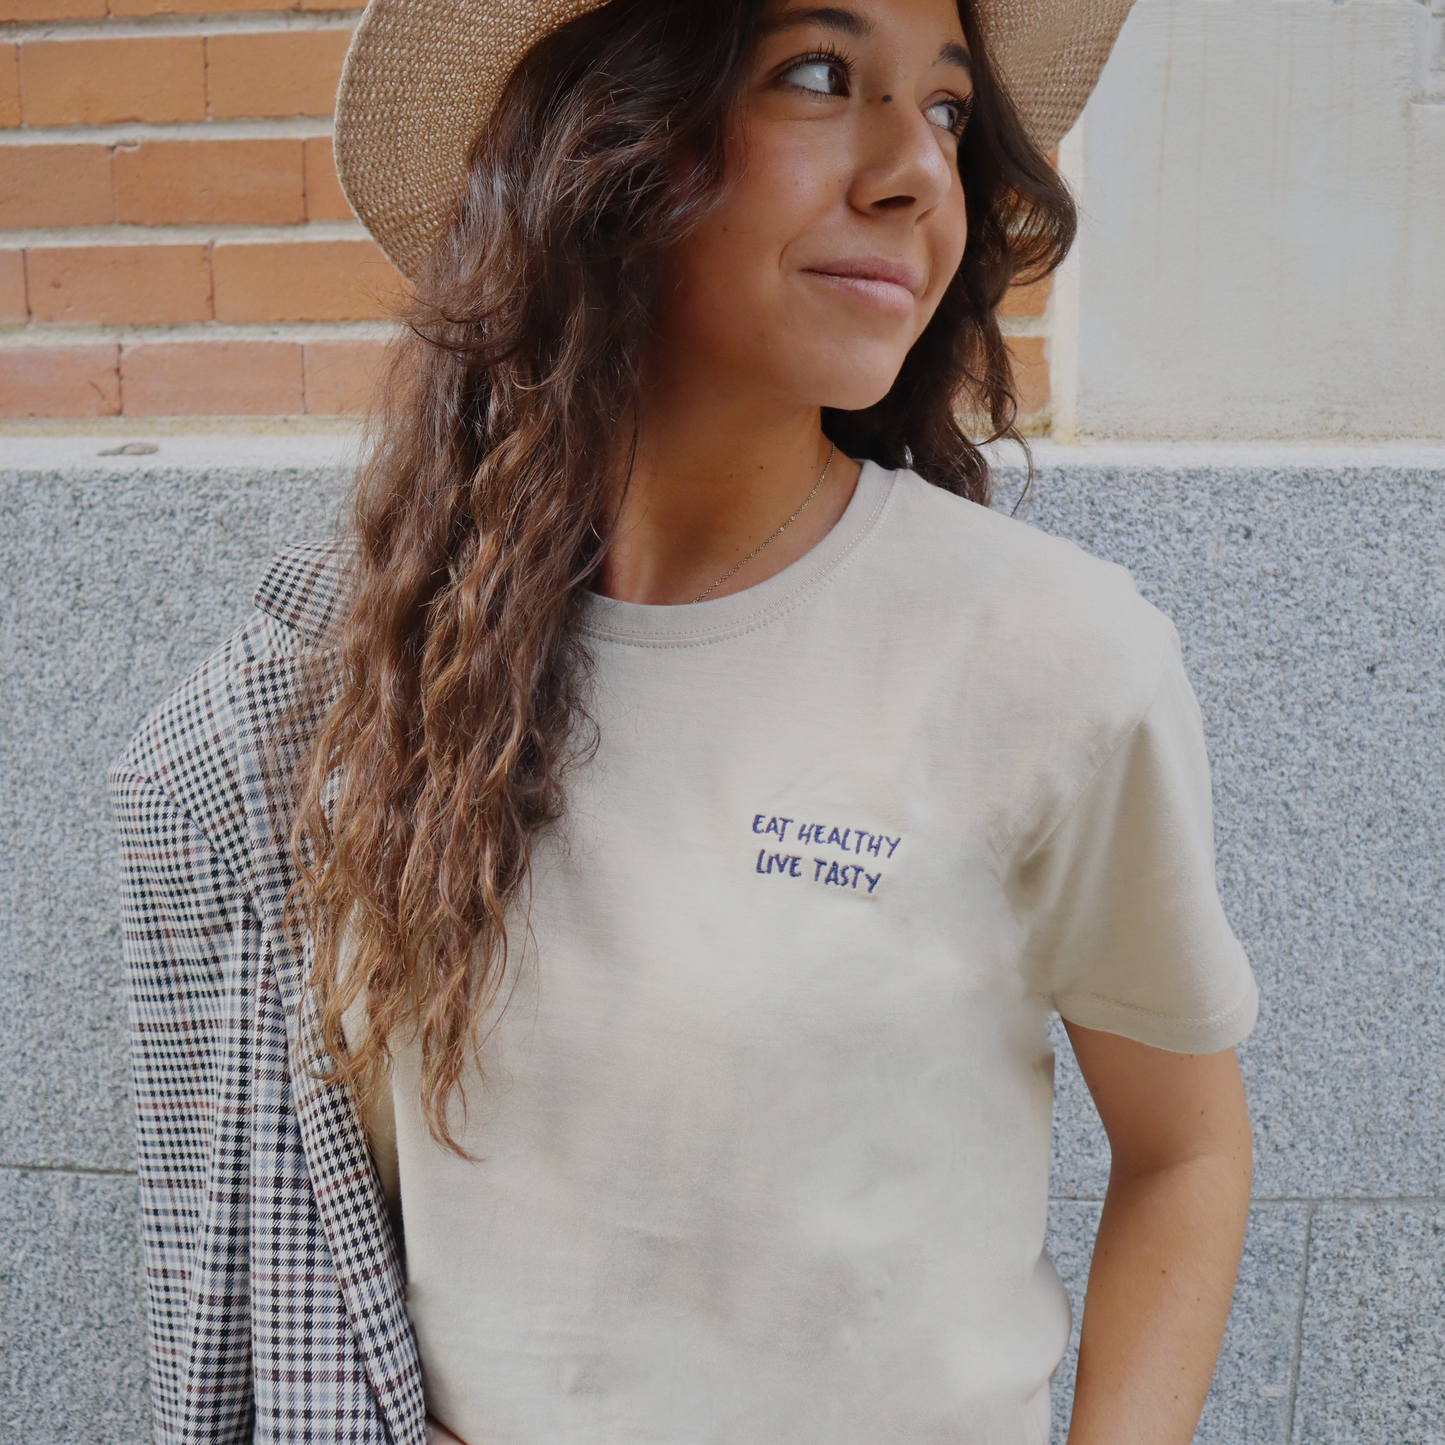 Basic cut t-shirt with round neck and embroidered quote. Available in dark grey, beige, light grey, light green and white. 100% organic cotton. Relaxed fit. Unisex. Designed in Spain. Camiseta básica. Gris oscuro, beige, gris claro, verde claro y blanco. Algodón orgánico. Corte holgado. Diseñada en España.